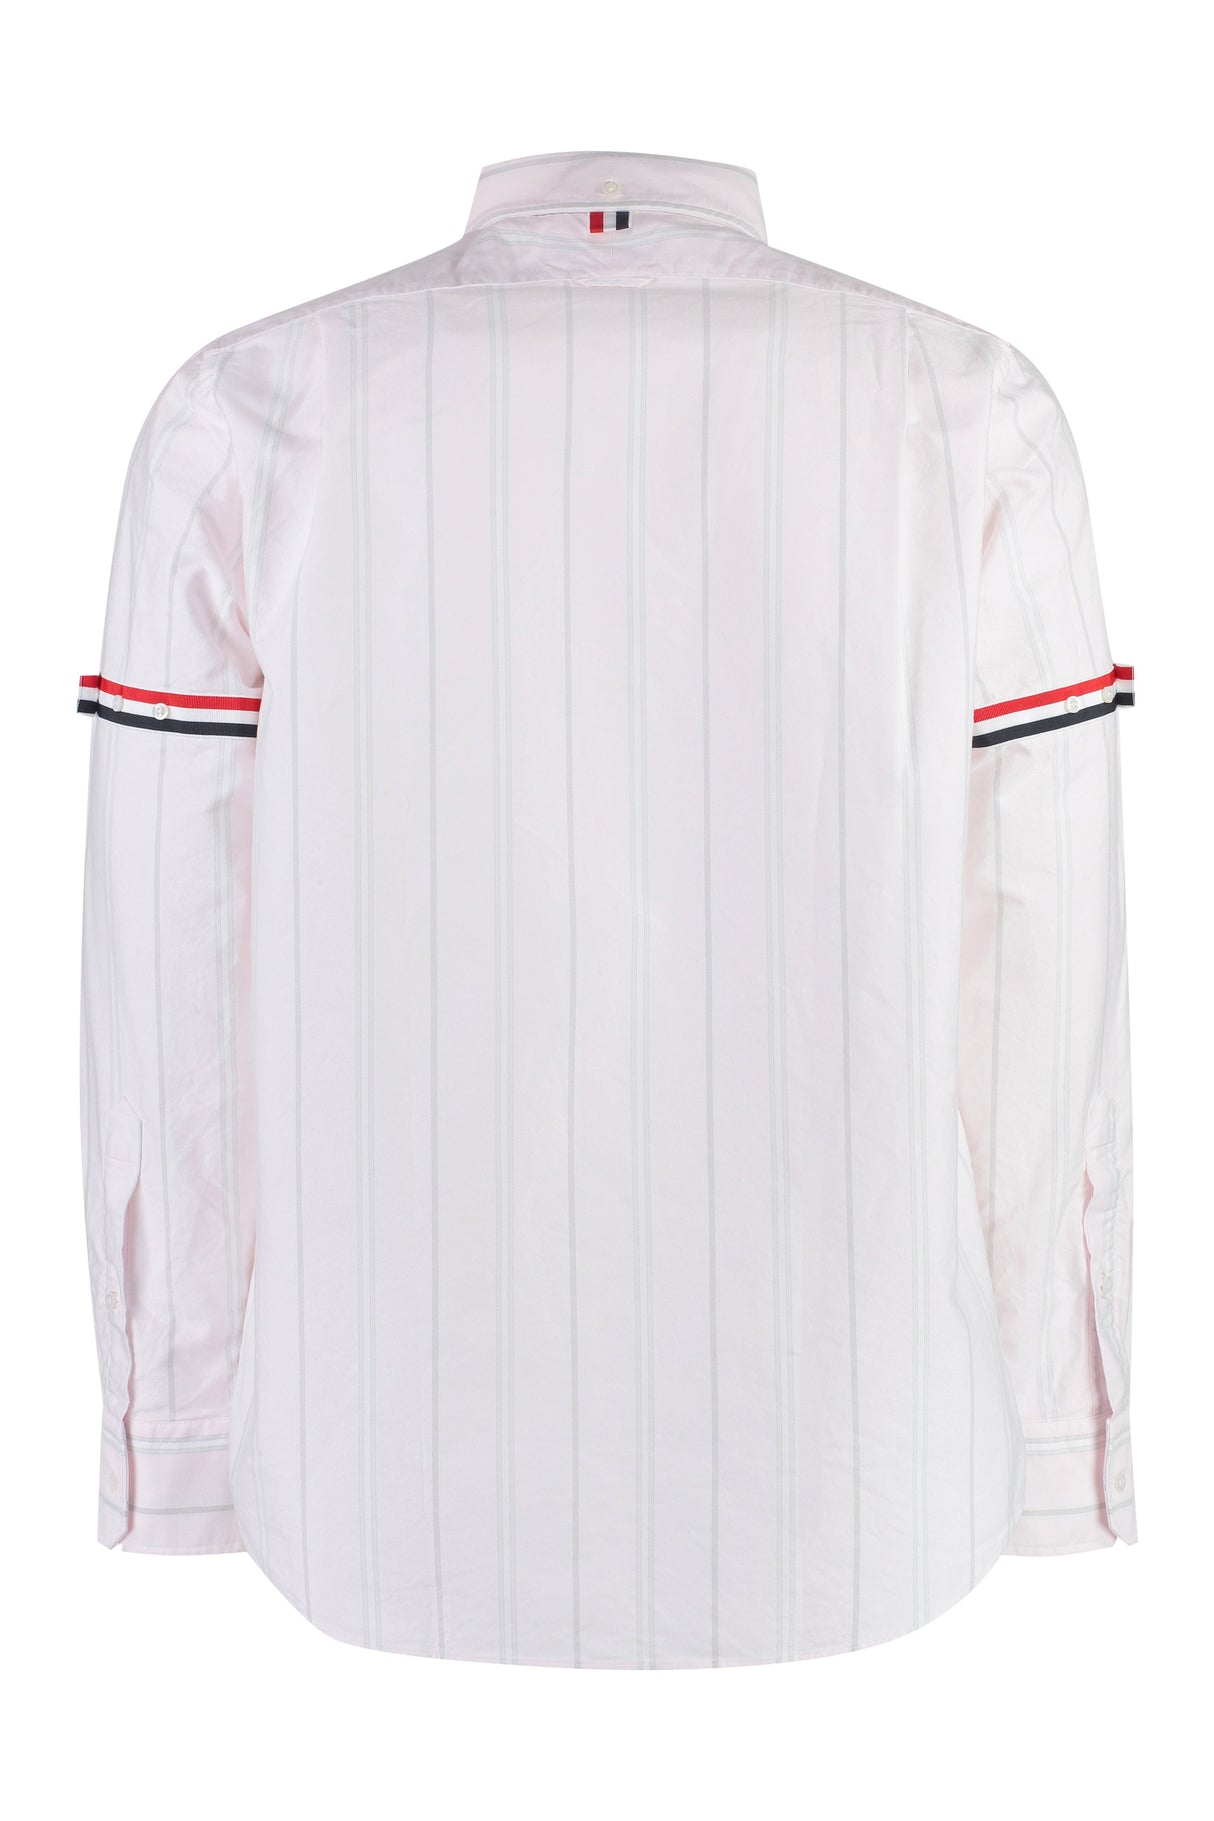 THOM BROWNE Tricolor Striped Cotton Shirt for Men - FW23 Collection